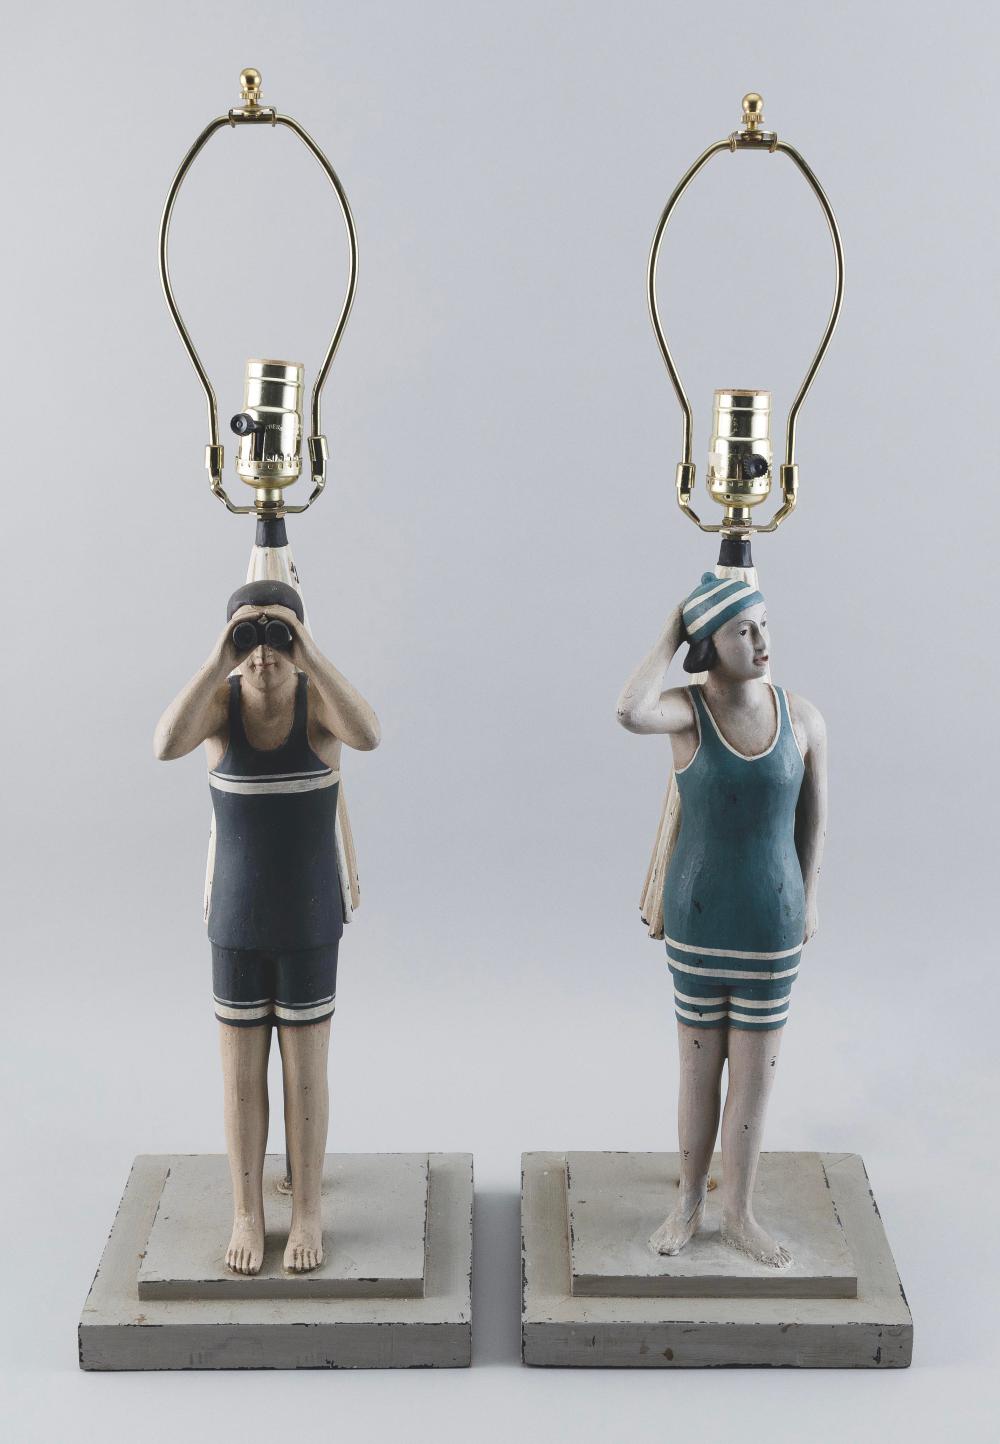 PAIR OF TABLE LAMPS FEATURING VINTAGE